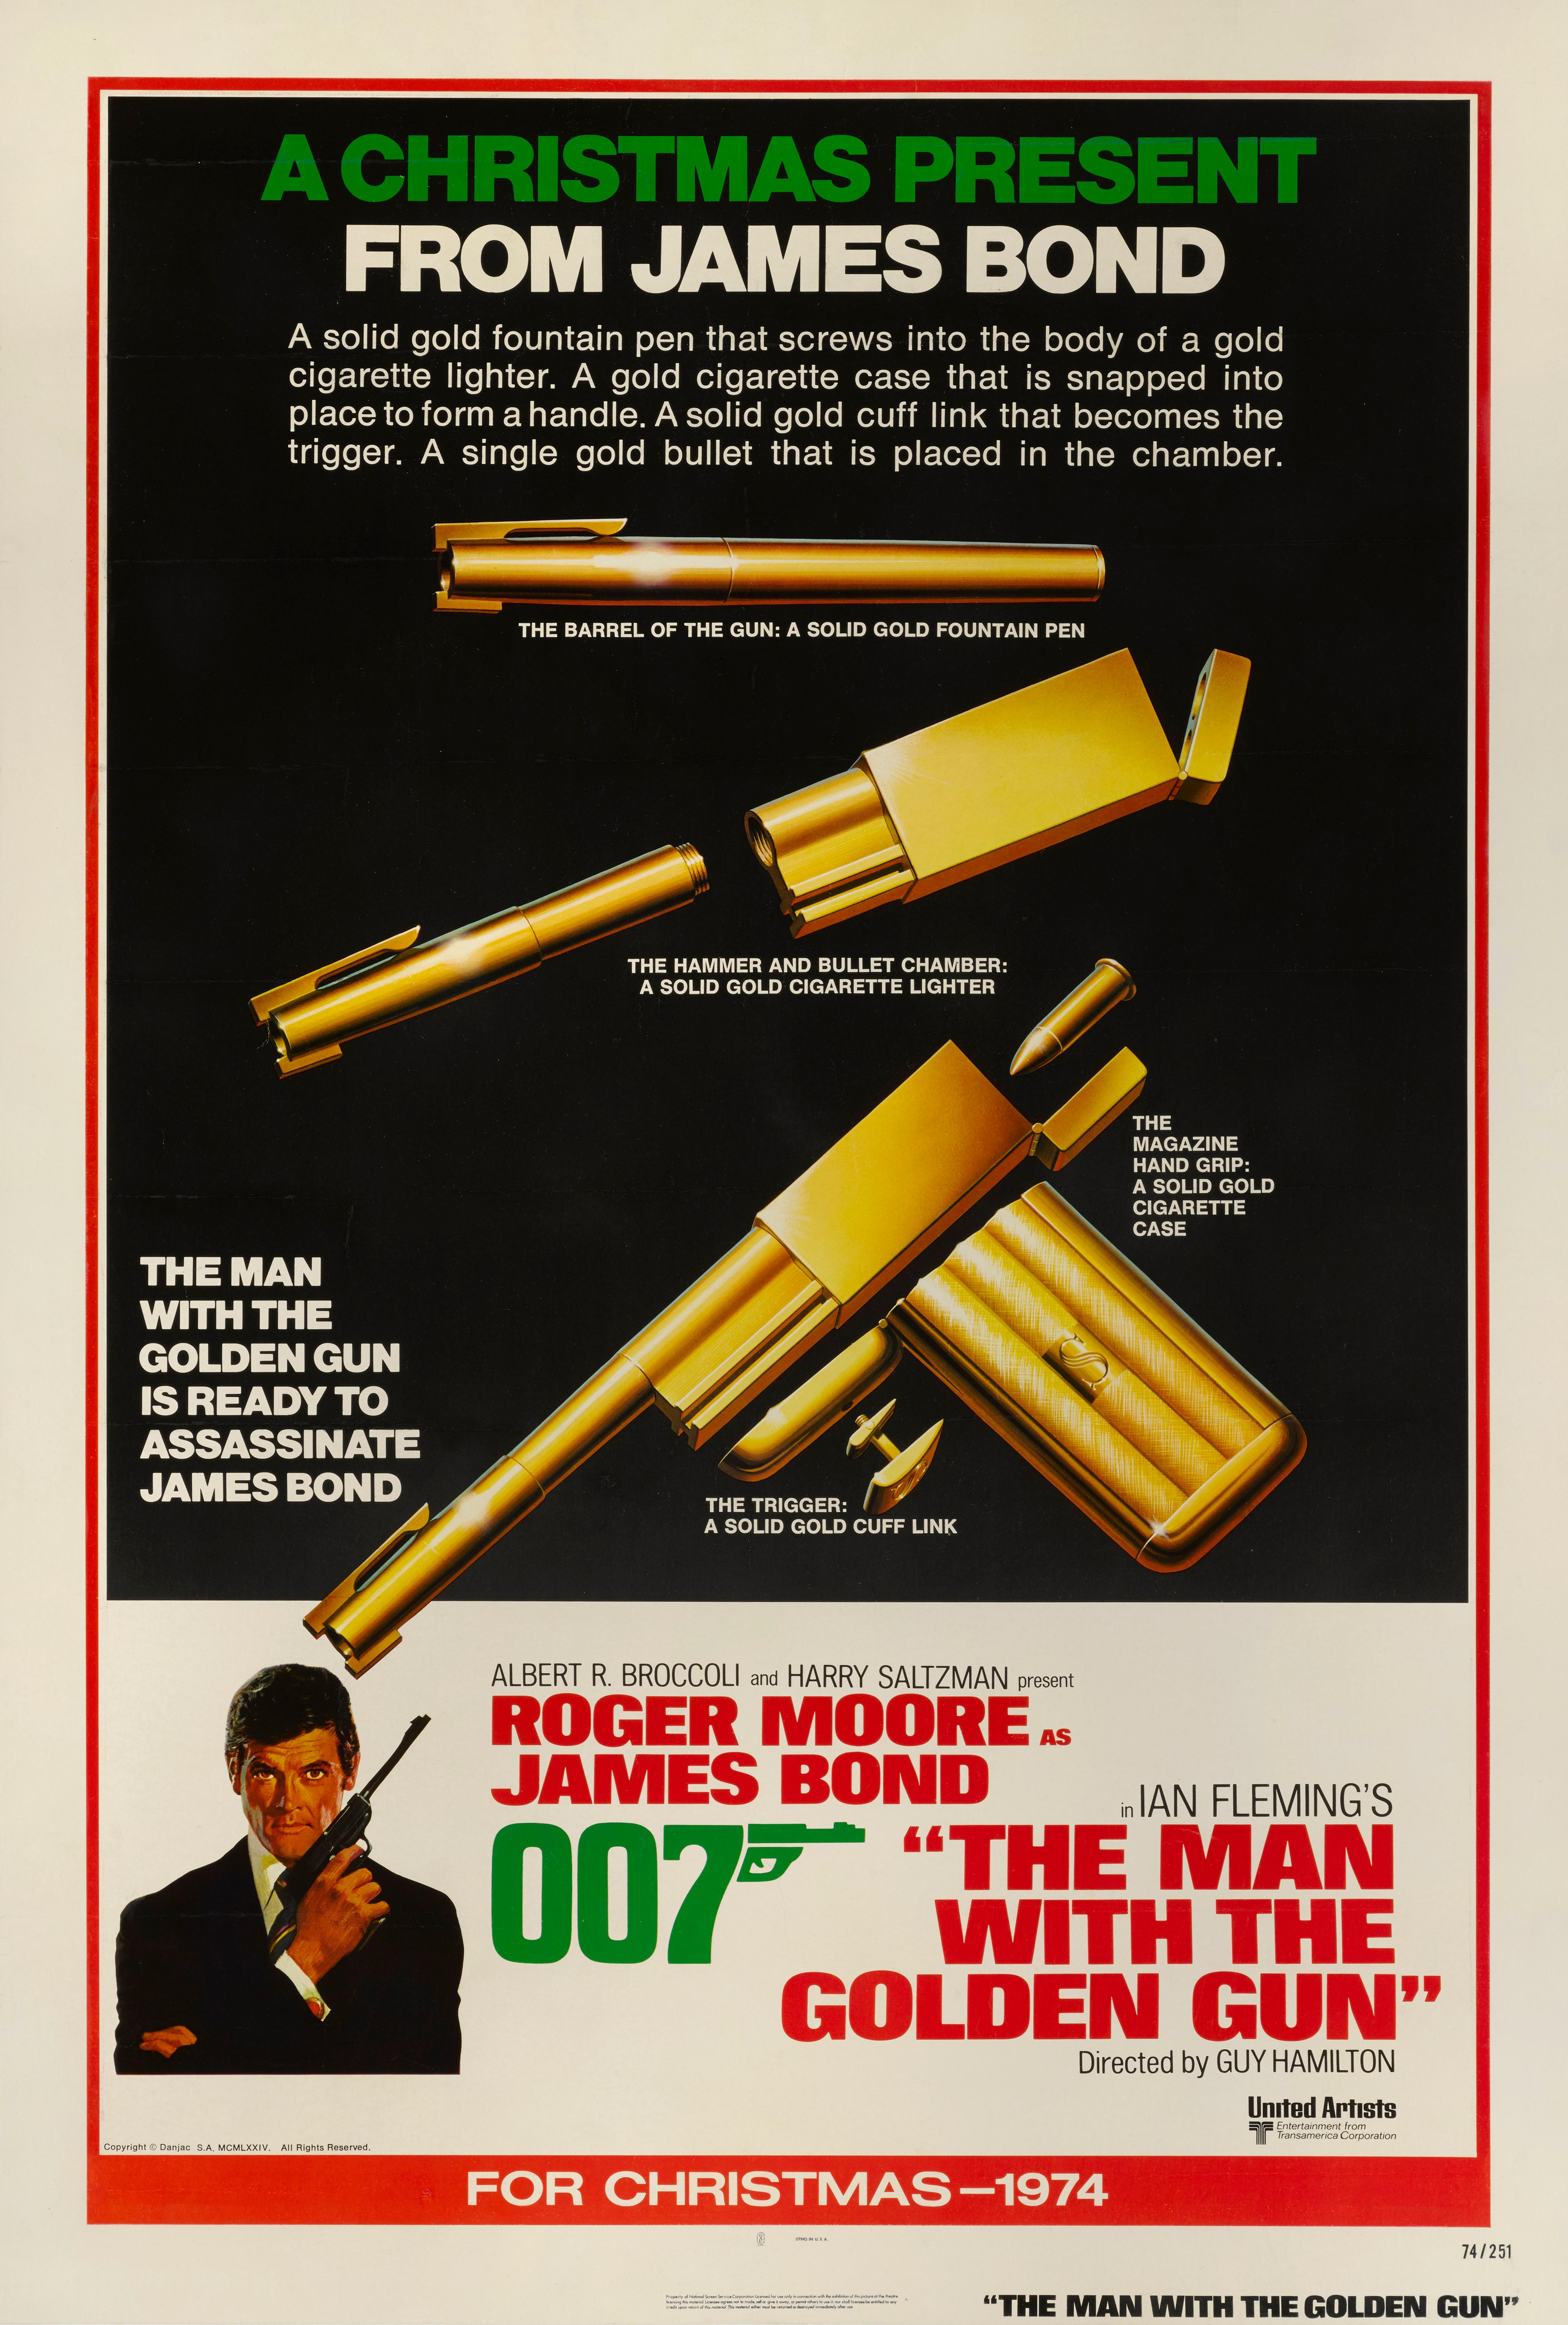 Original US Style Christmas advance style film poster for the 1974 The Man with the Golden Gun.
This is the second time that Roger Moore played James Bond, and the fourth and final time that Guy Hamilton would direct a Bond film. Christopher Lee